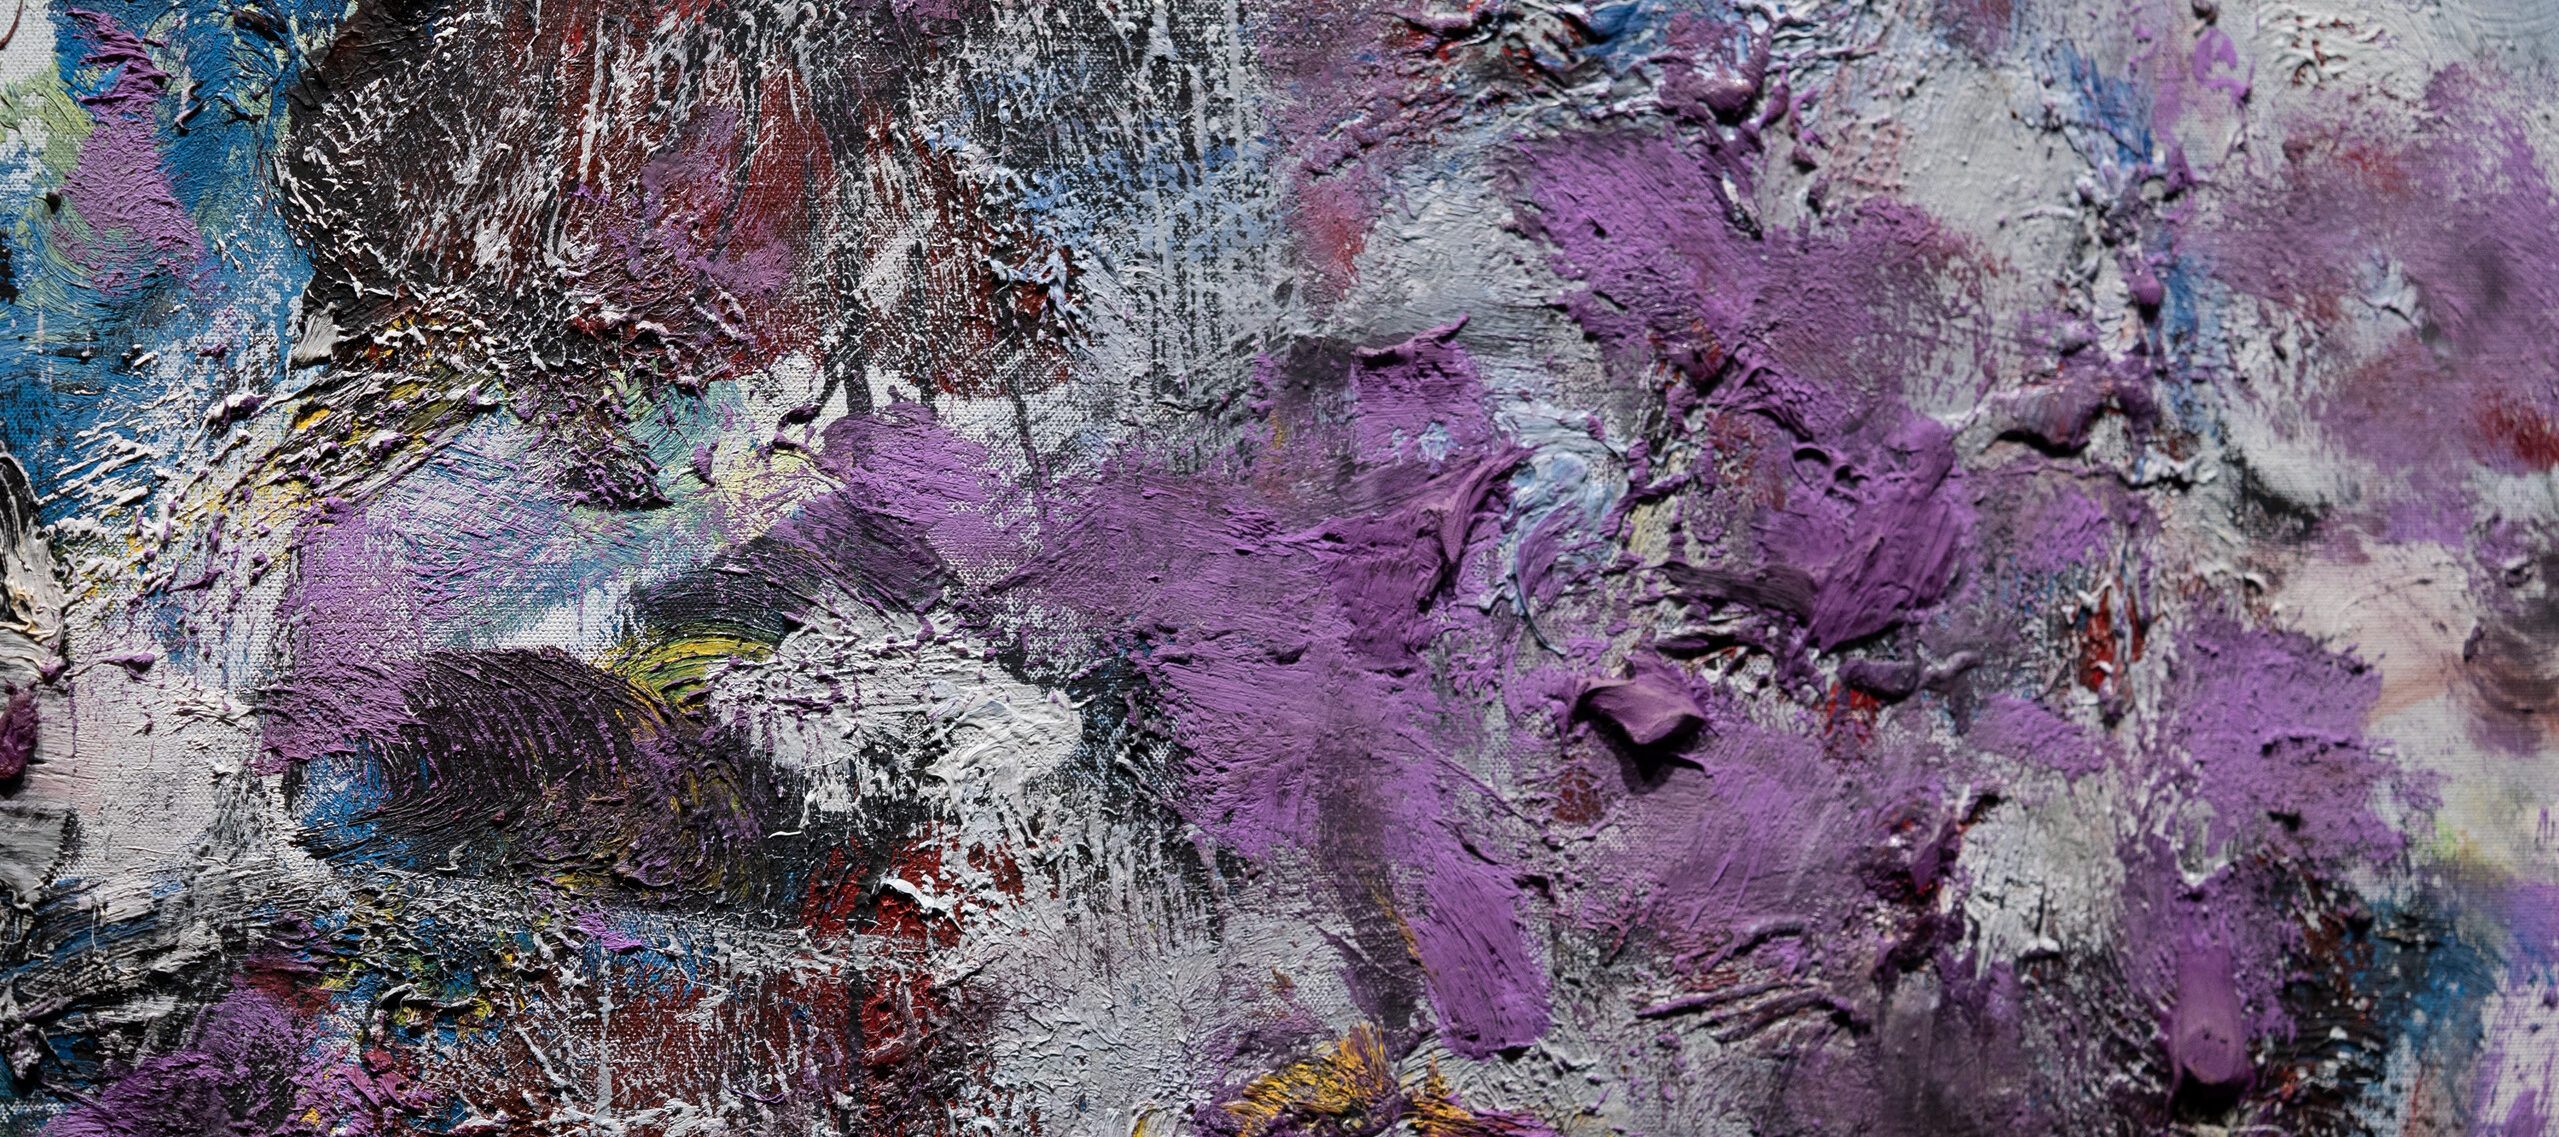 Close-up detail of an abstract painting that features dense and chaotic brushstrokes of pale gray, lavender, and cobalt.